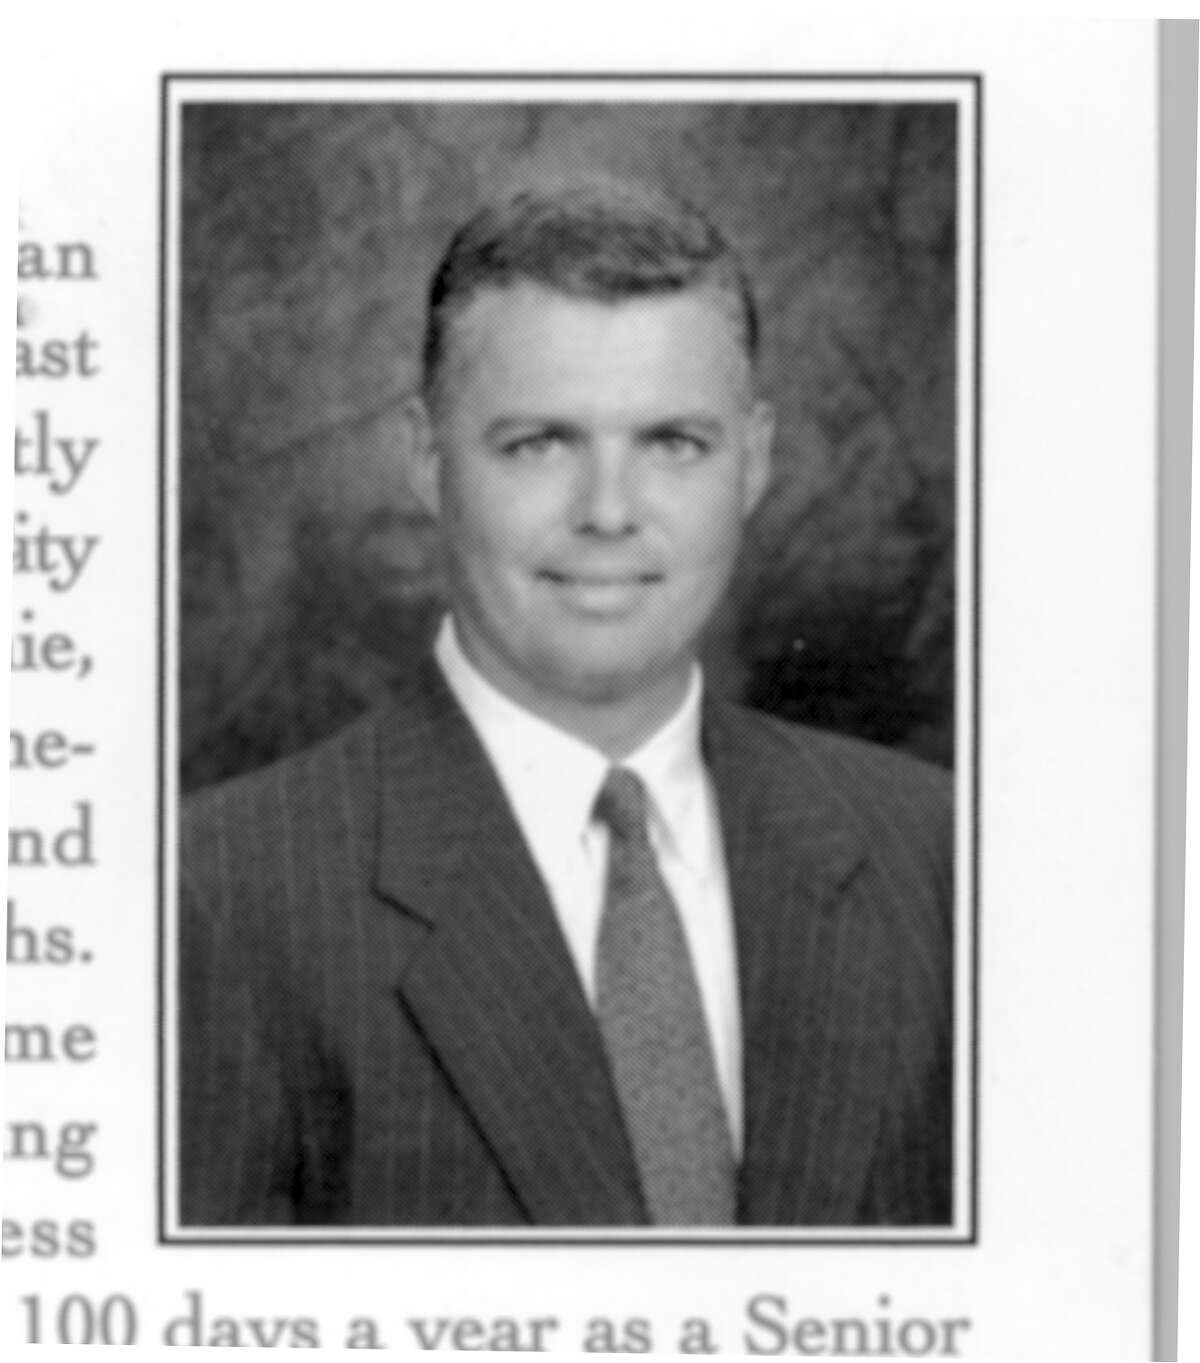 Dave Norman - Cand. for State Rep. Dist. 23. 10/98 HOUCHRON CAPTION (10/25/1998): Republican DAVE NORMAN HOUSTON CHRONICLE SPECIAL SECTION: VOTER'S GUIDE OCTOBER 1998.